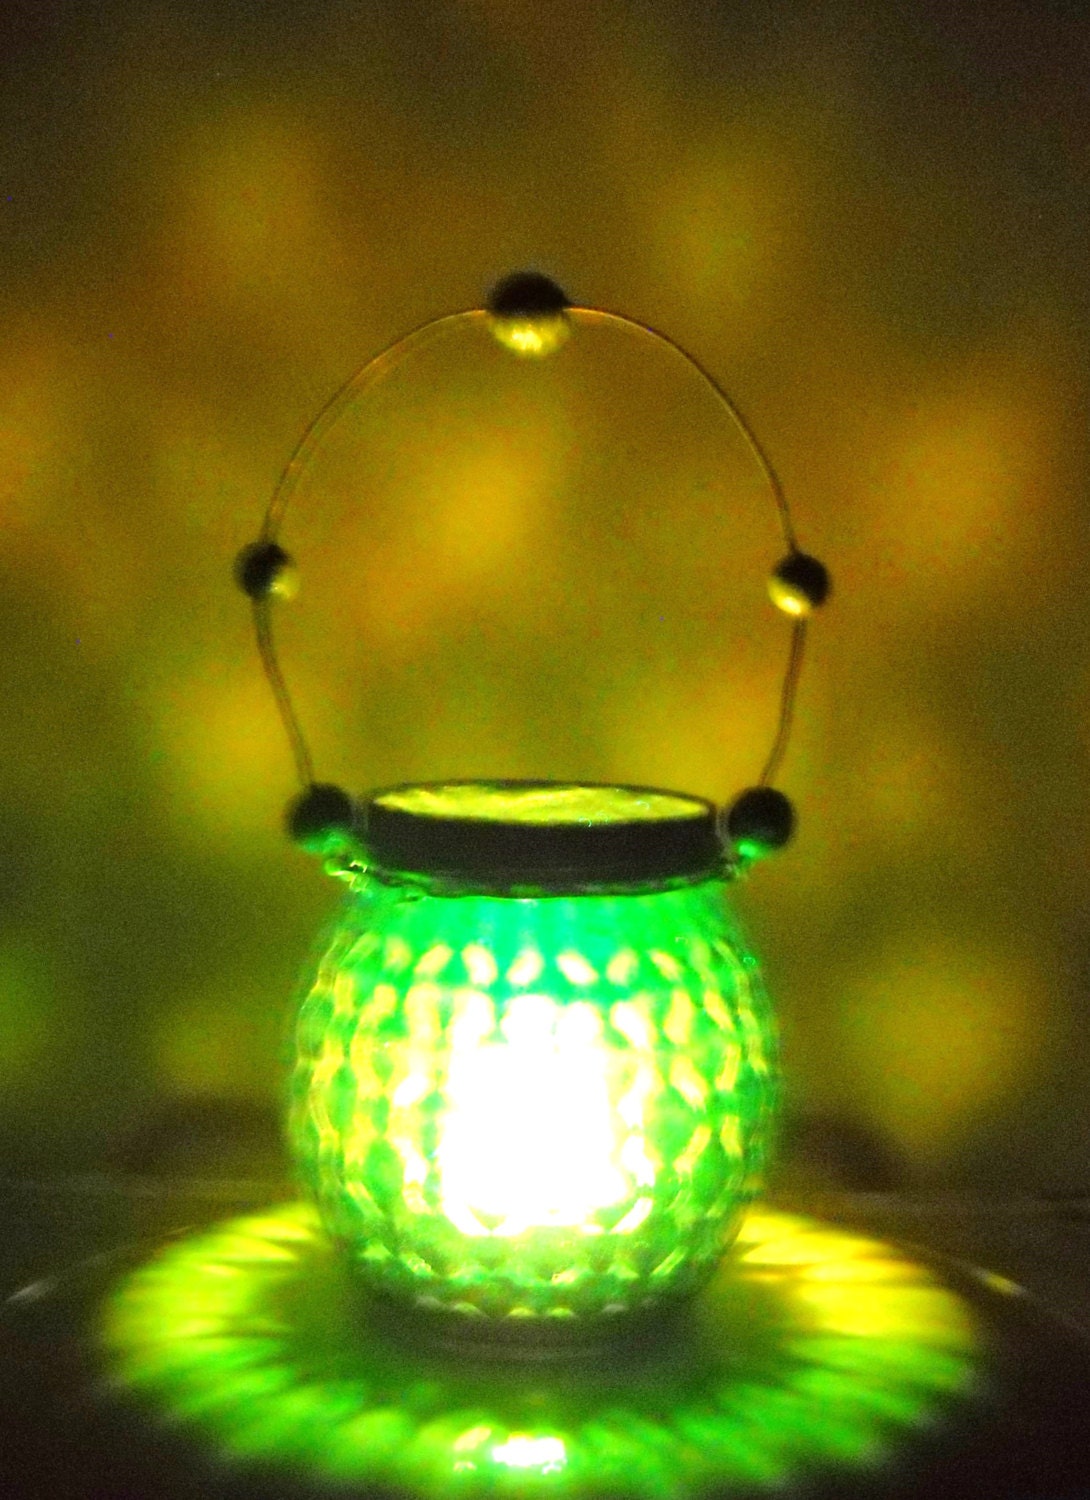 SPRING SALE - Hanging green lantern  - beaded wire handle - made from a pretty jelly jar - for LED candle - ChickenJungle